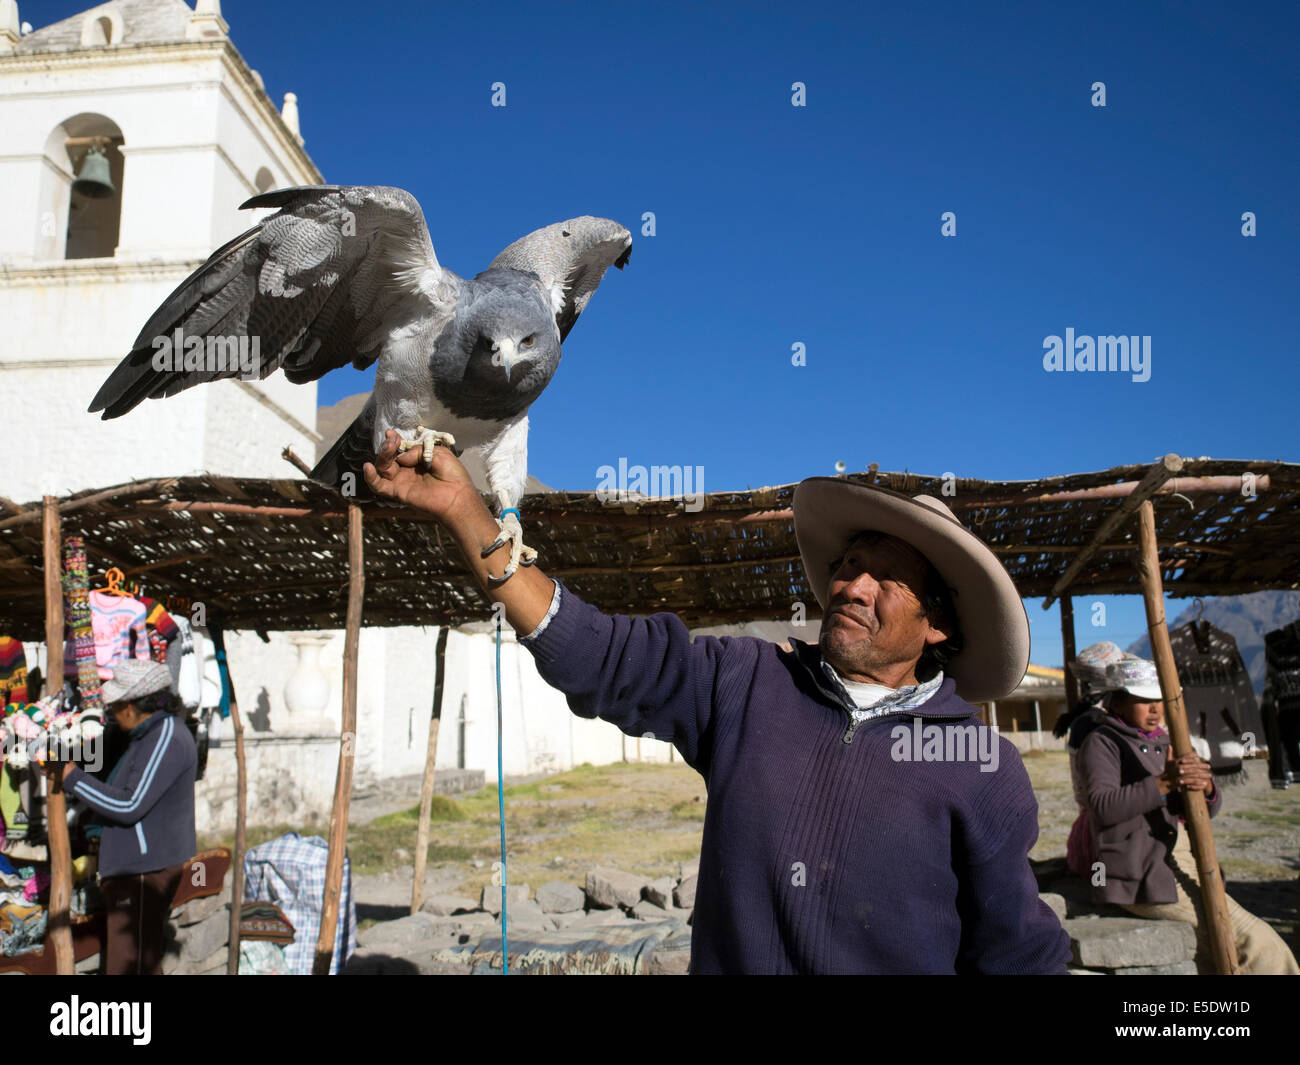 Local man with eagle - Yanque, Peru Stock Photo